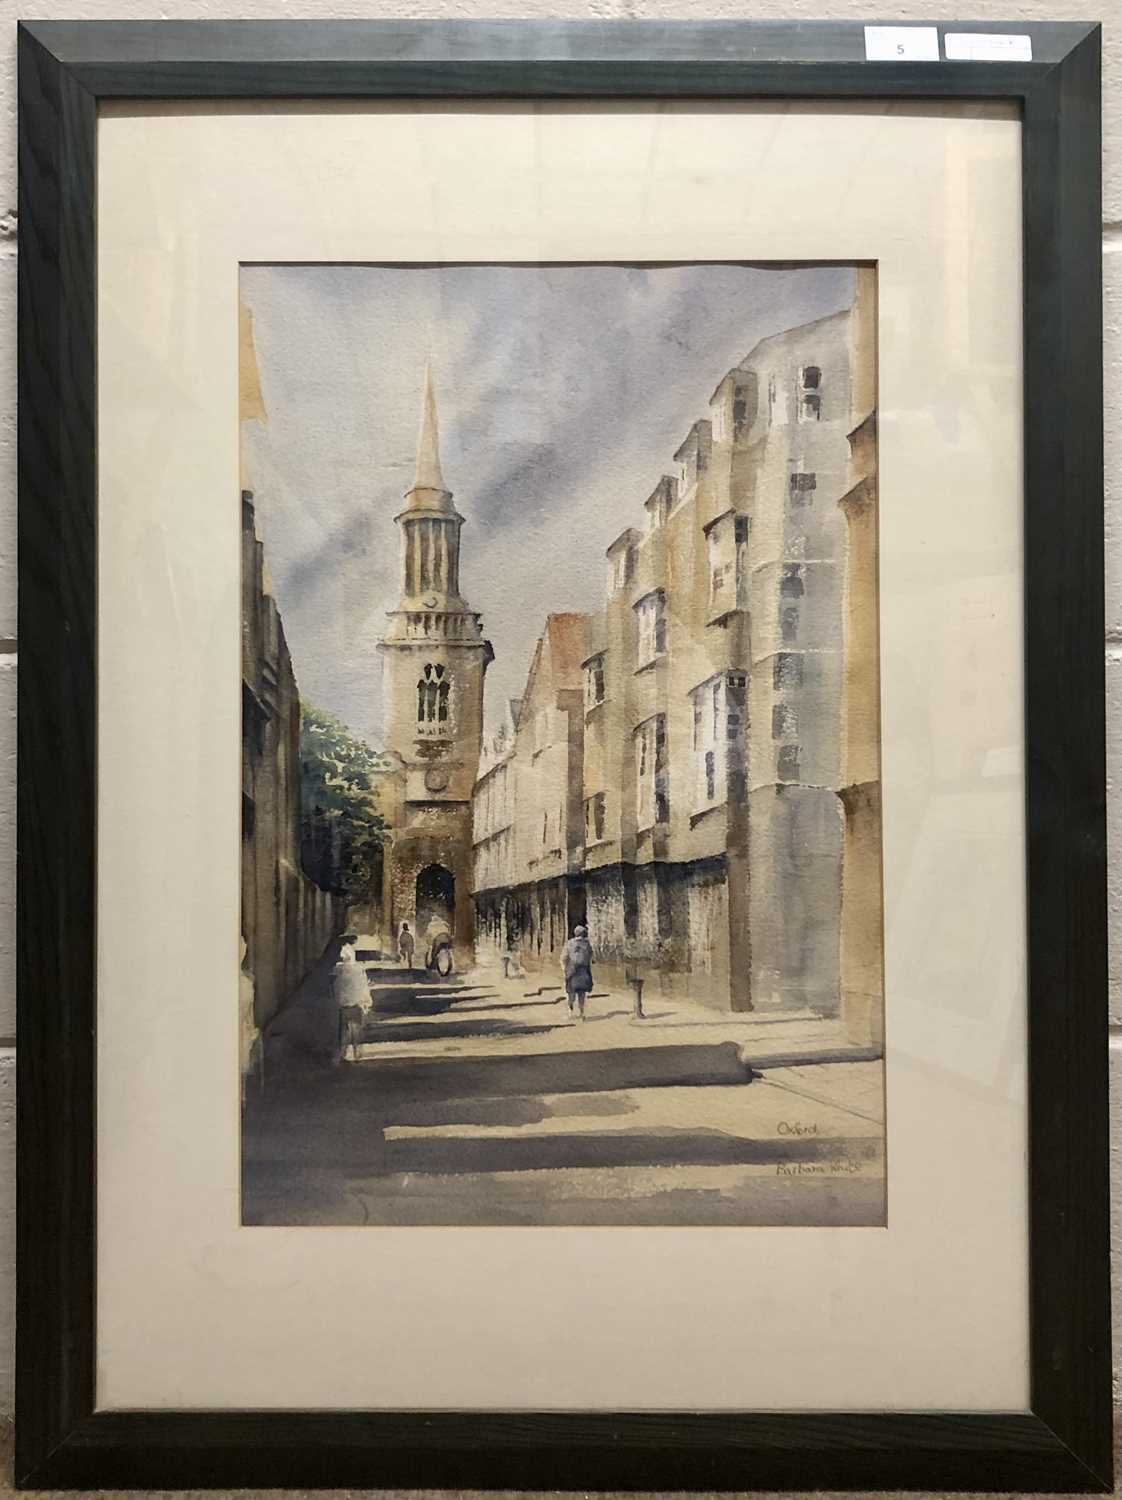 Barbara White (British, Contemporary): All Saints Church, Oxford, watercolour, signed, framed and